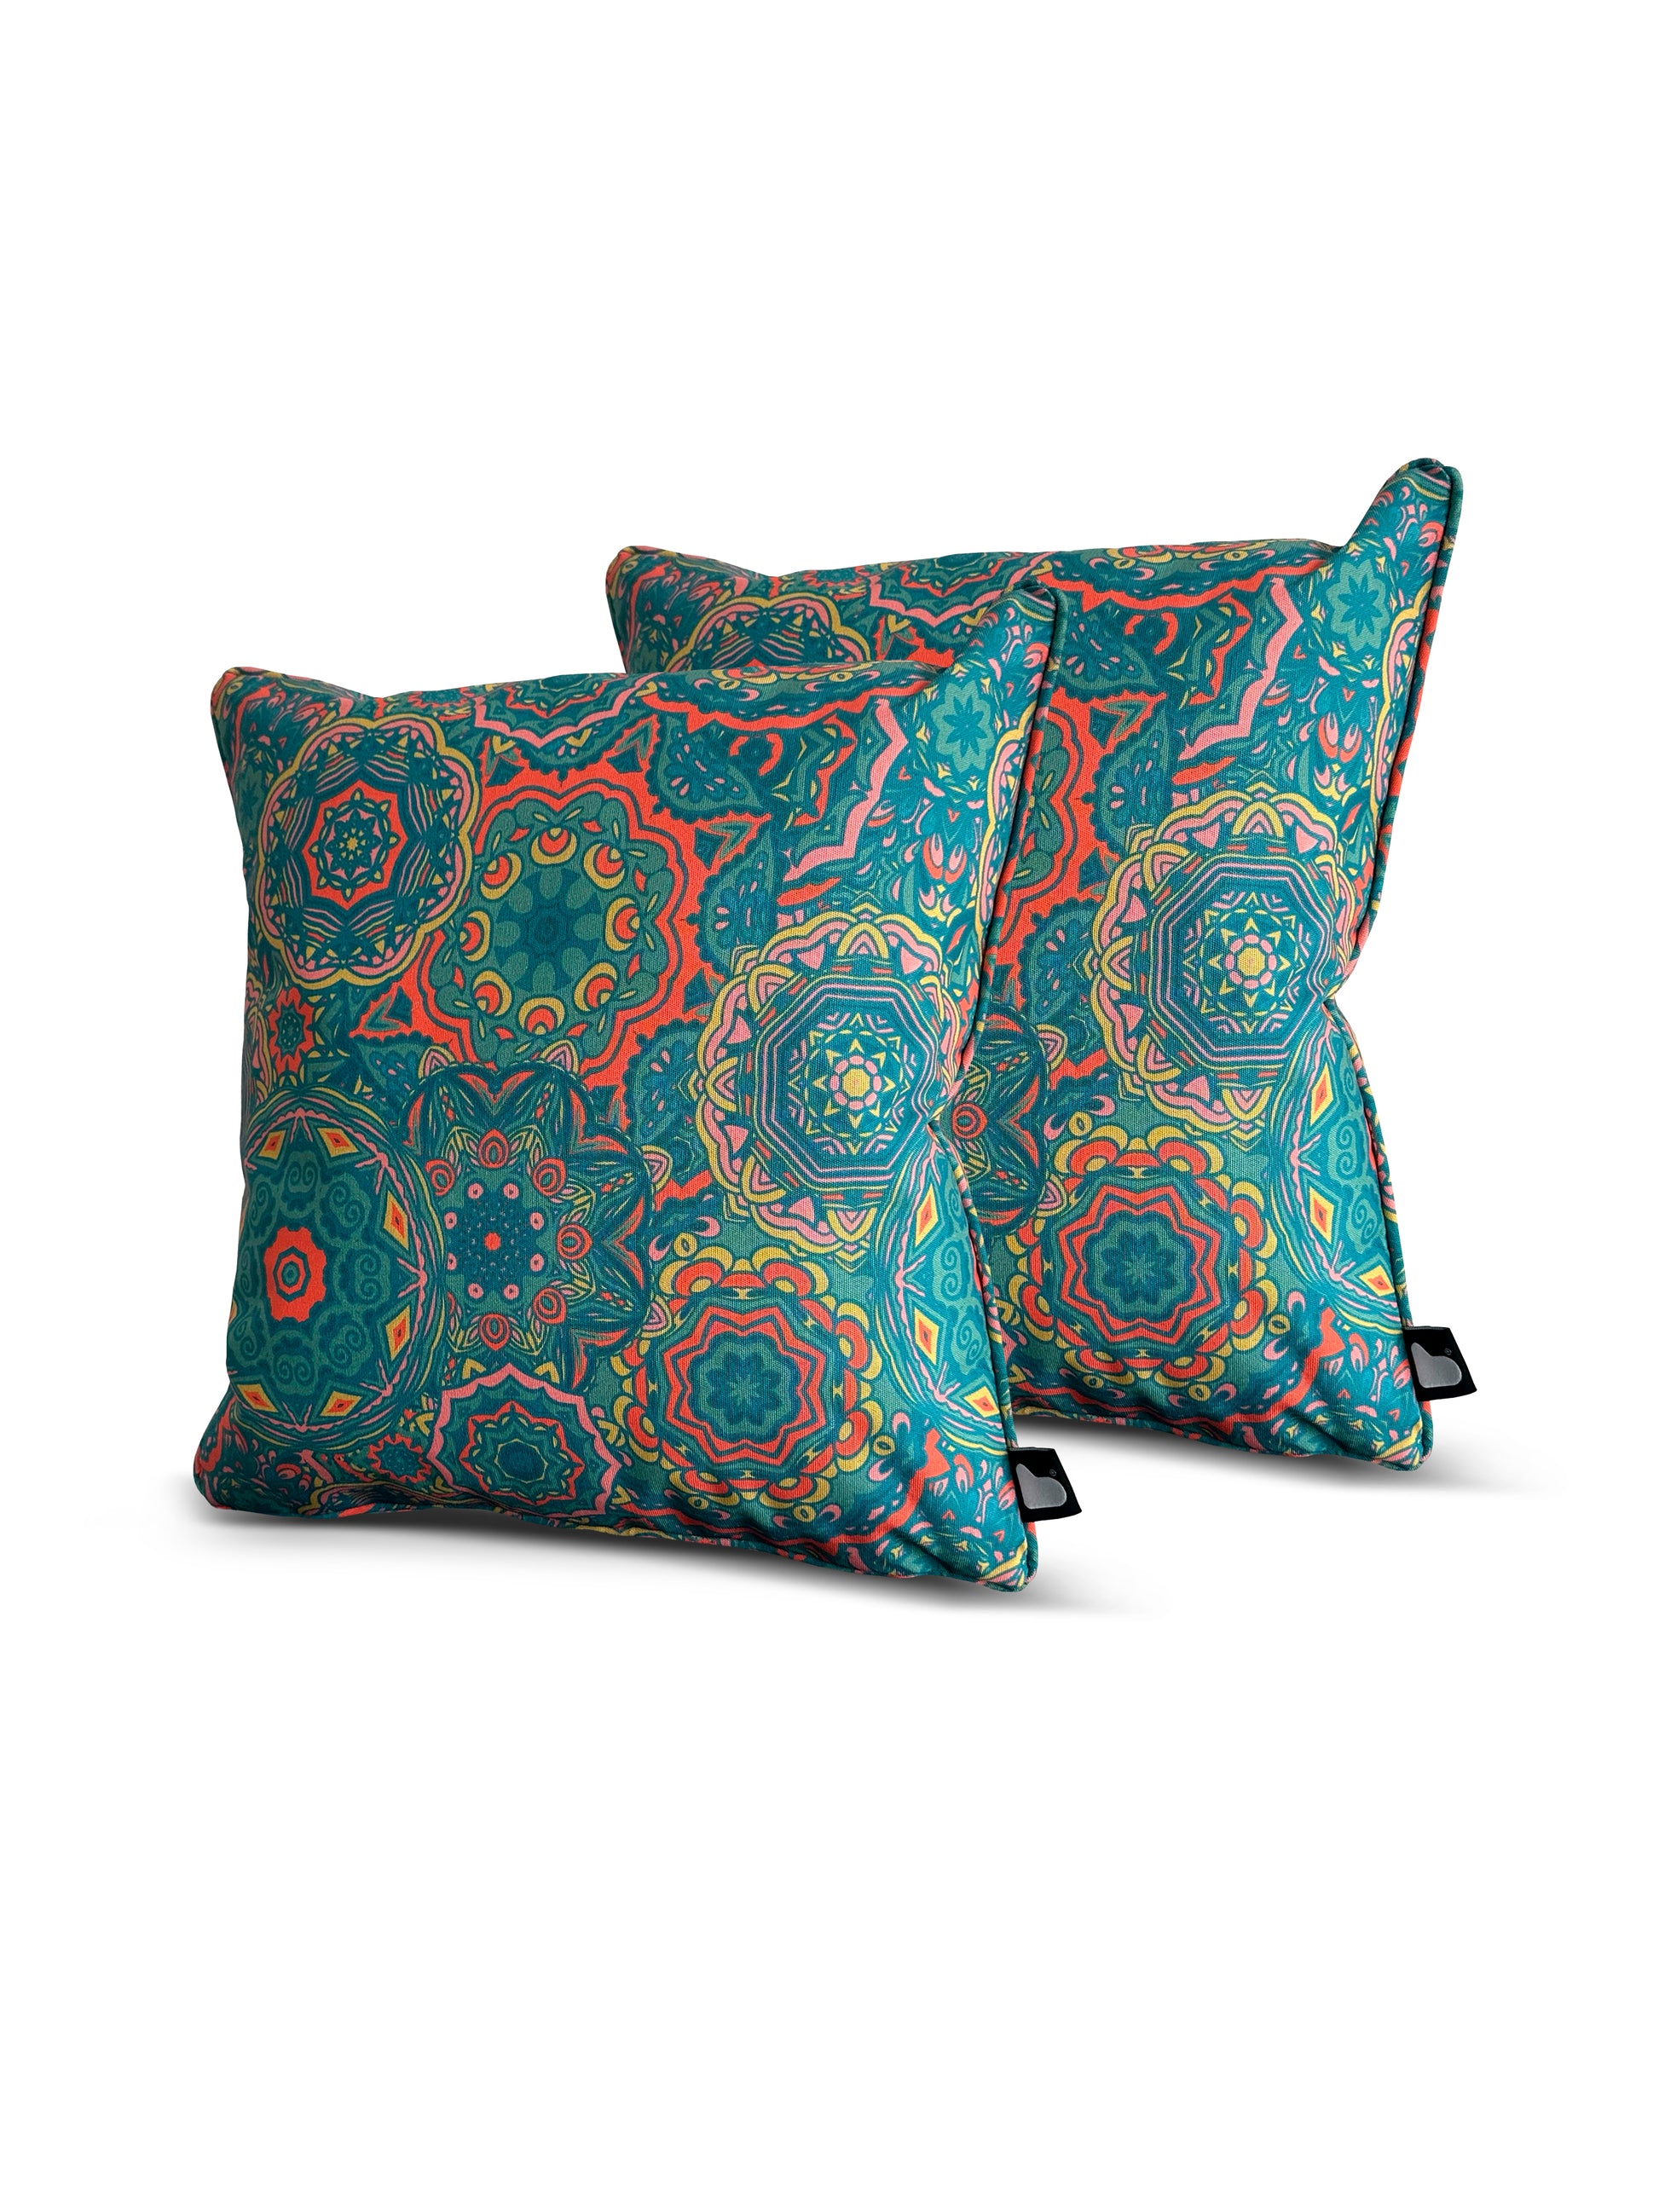 Two colorful B Cushion Twin Pack Art Collection throw pillows from Brisks with intricate mandala patterns in shades of green, orange, pink, and blue. The pillows, made from splash-proof fabric and UV resistant material, are placed against a white background, showcasing their vibrant design and adding a touch of bohemian style.